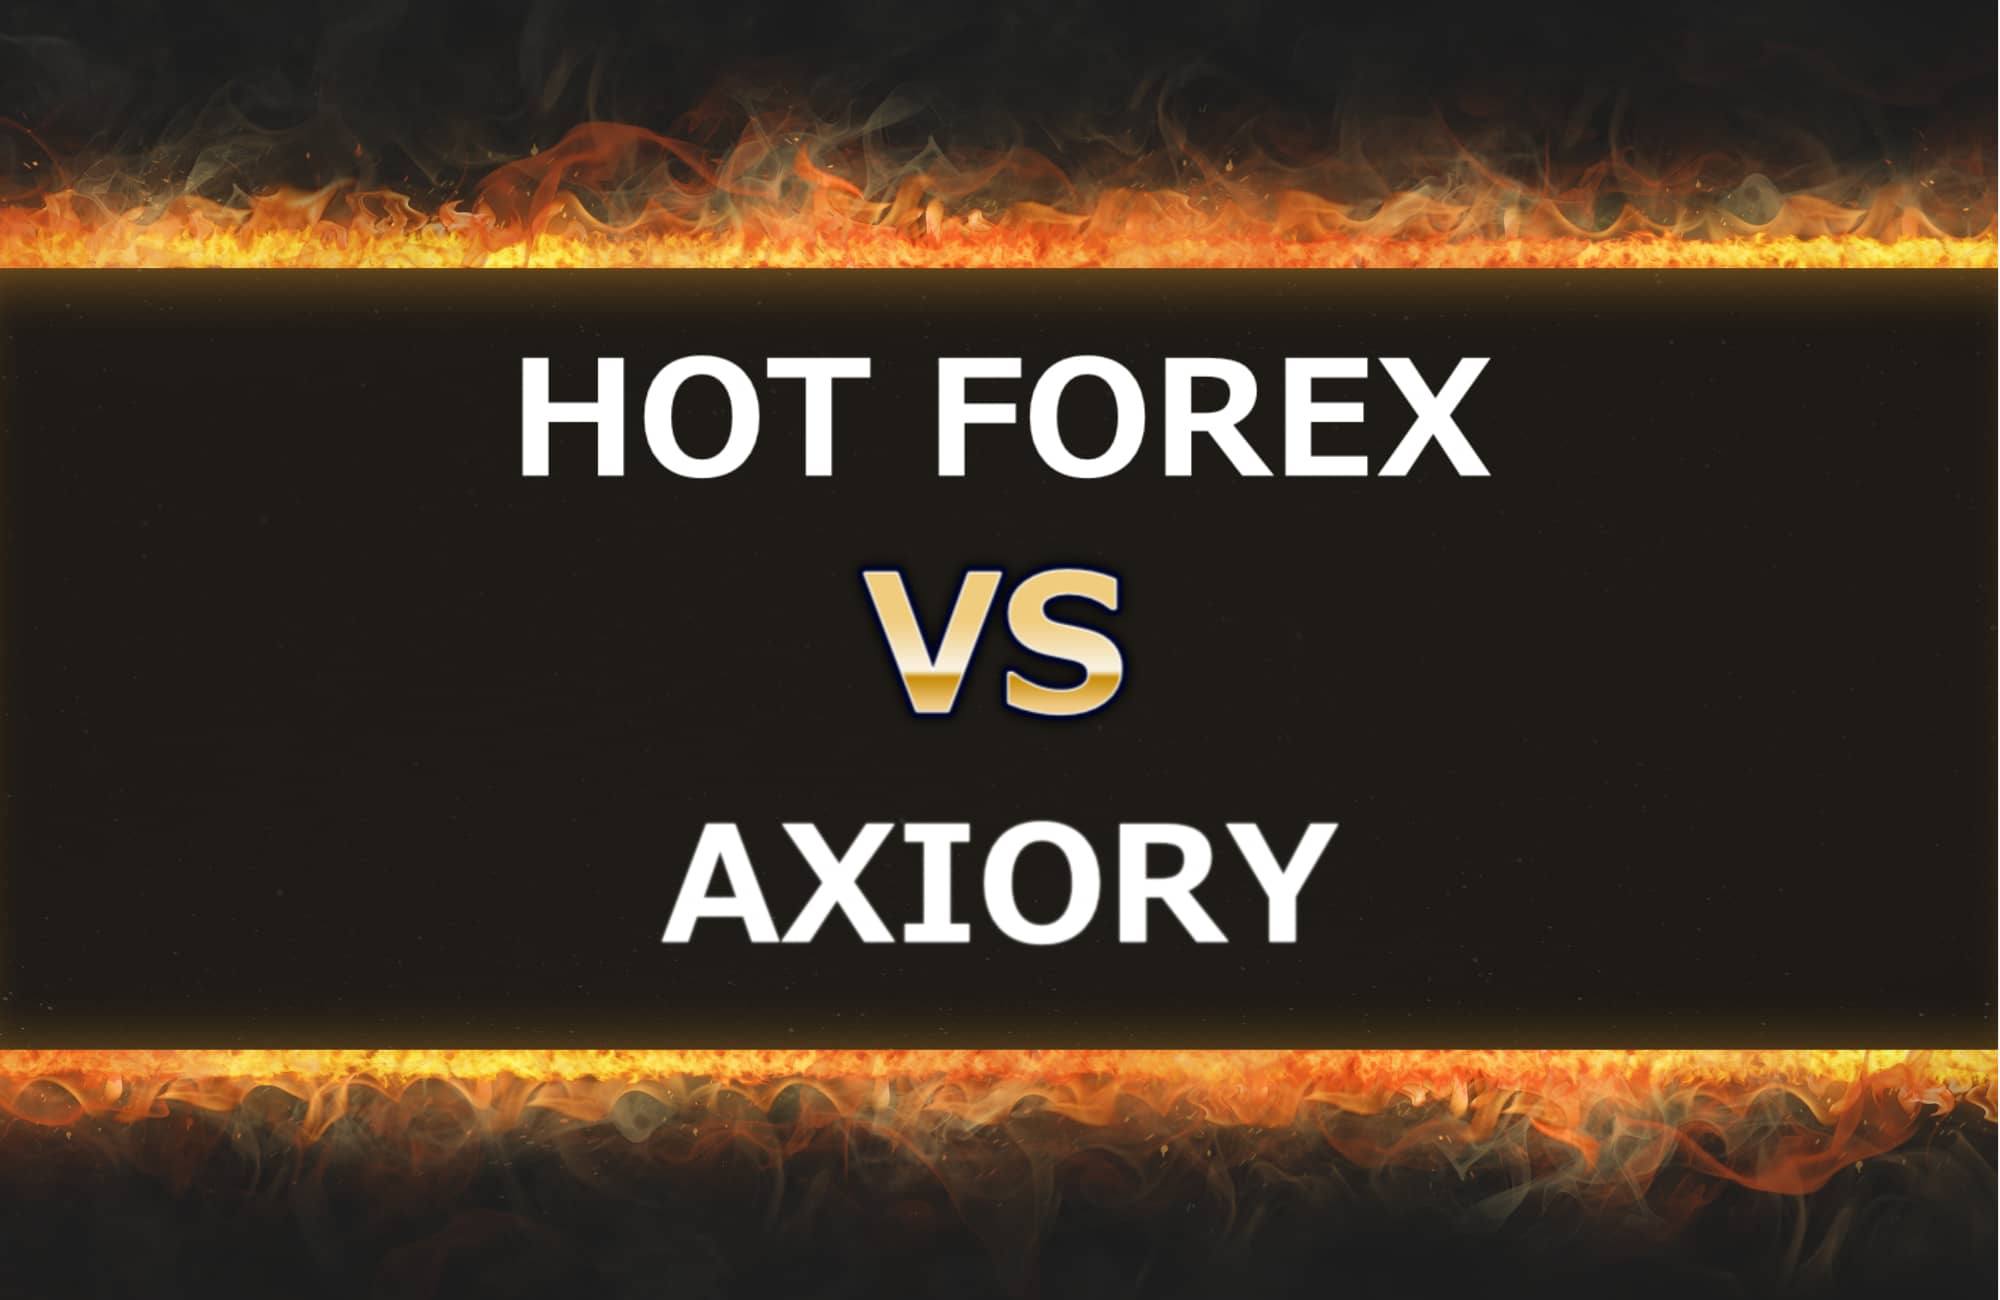 HOT FOREXとAXIORYの比較